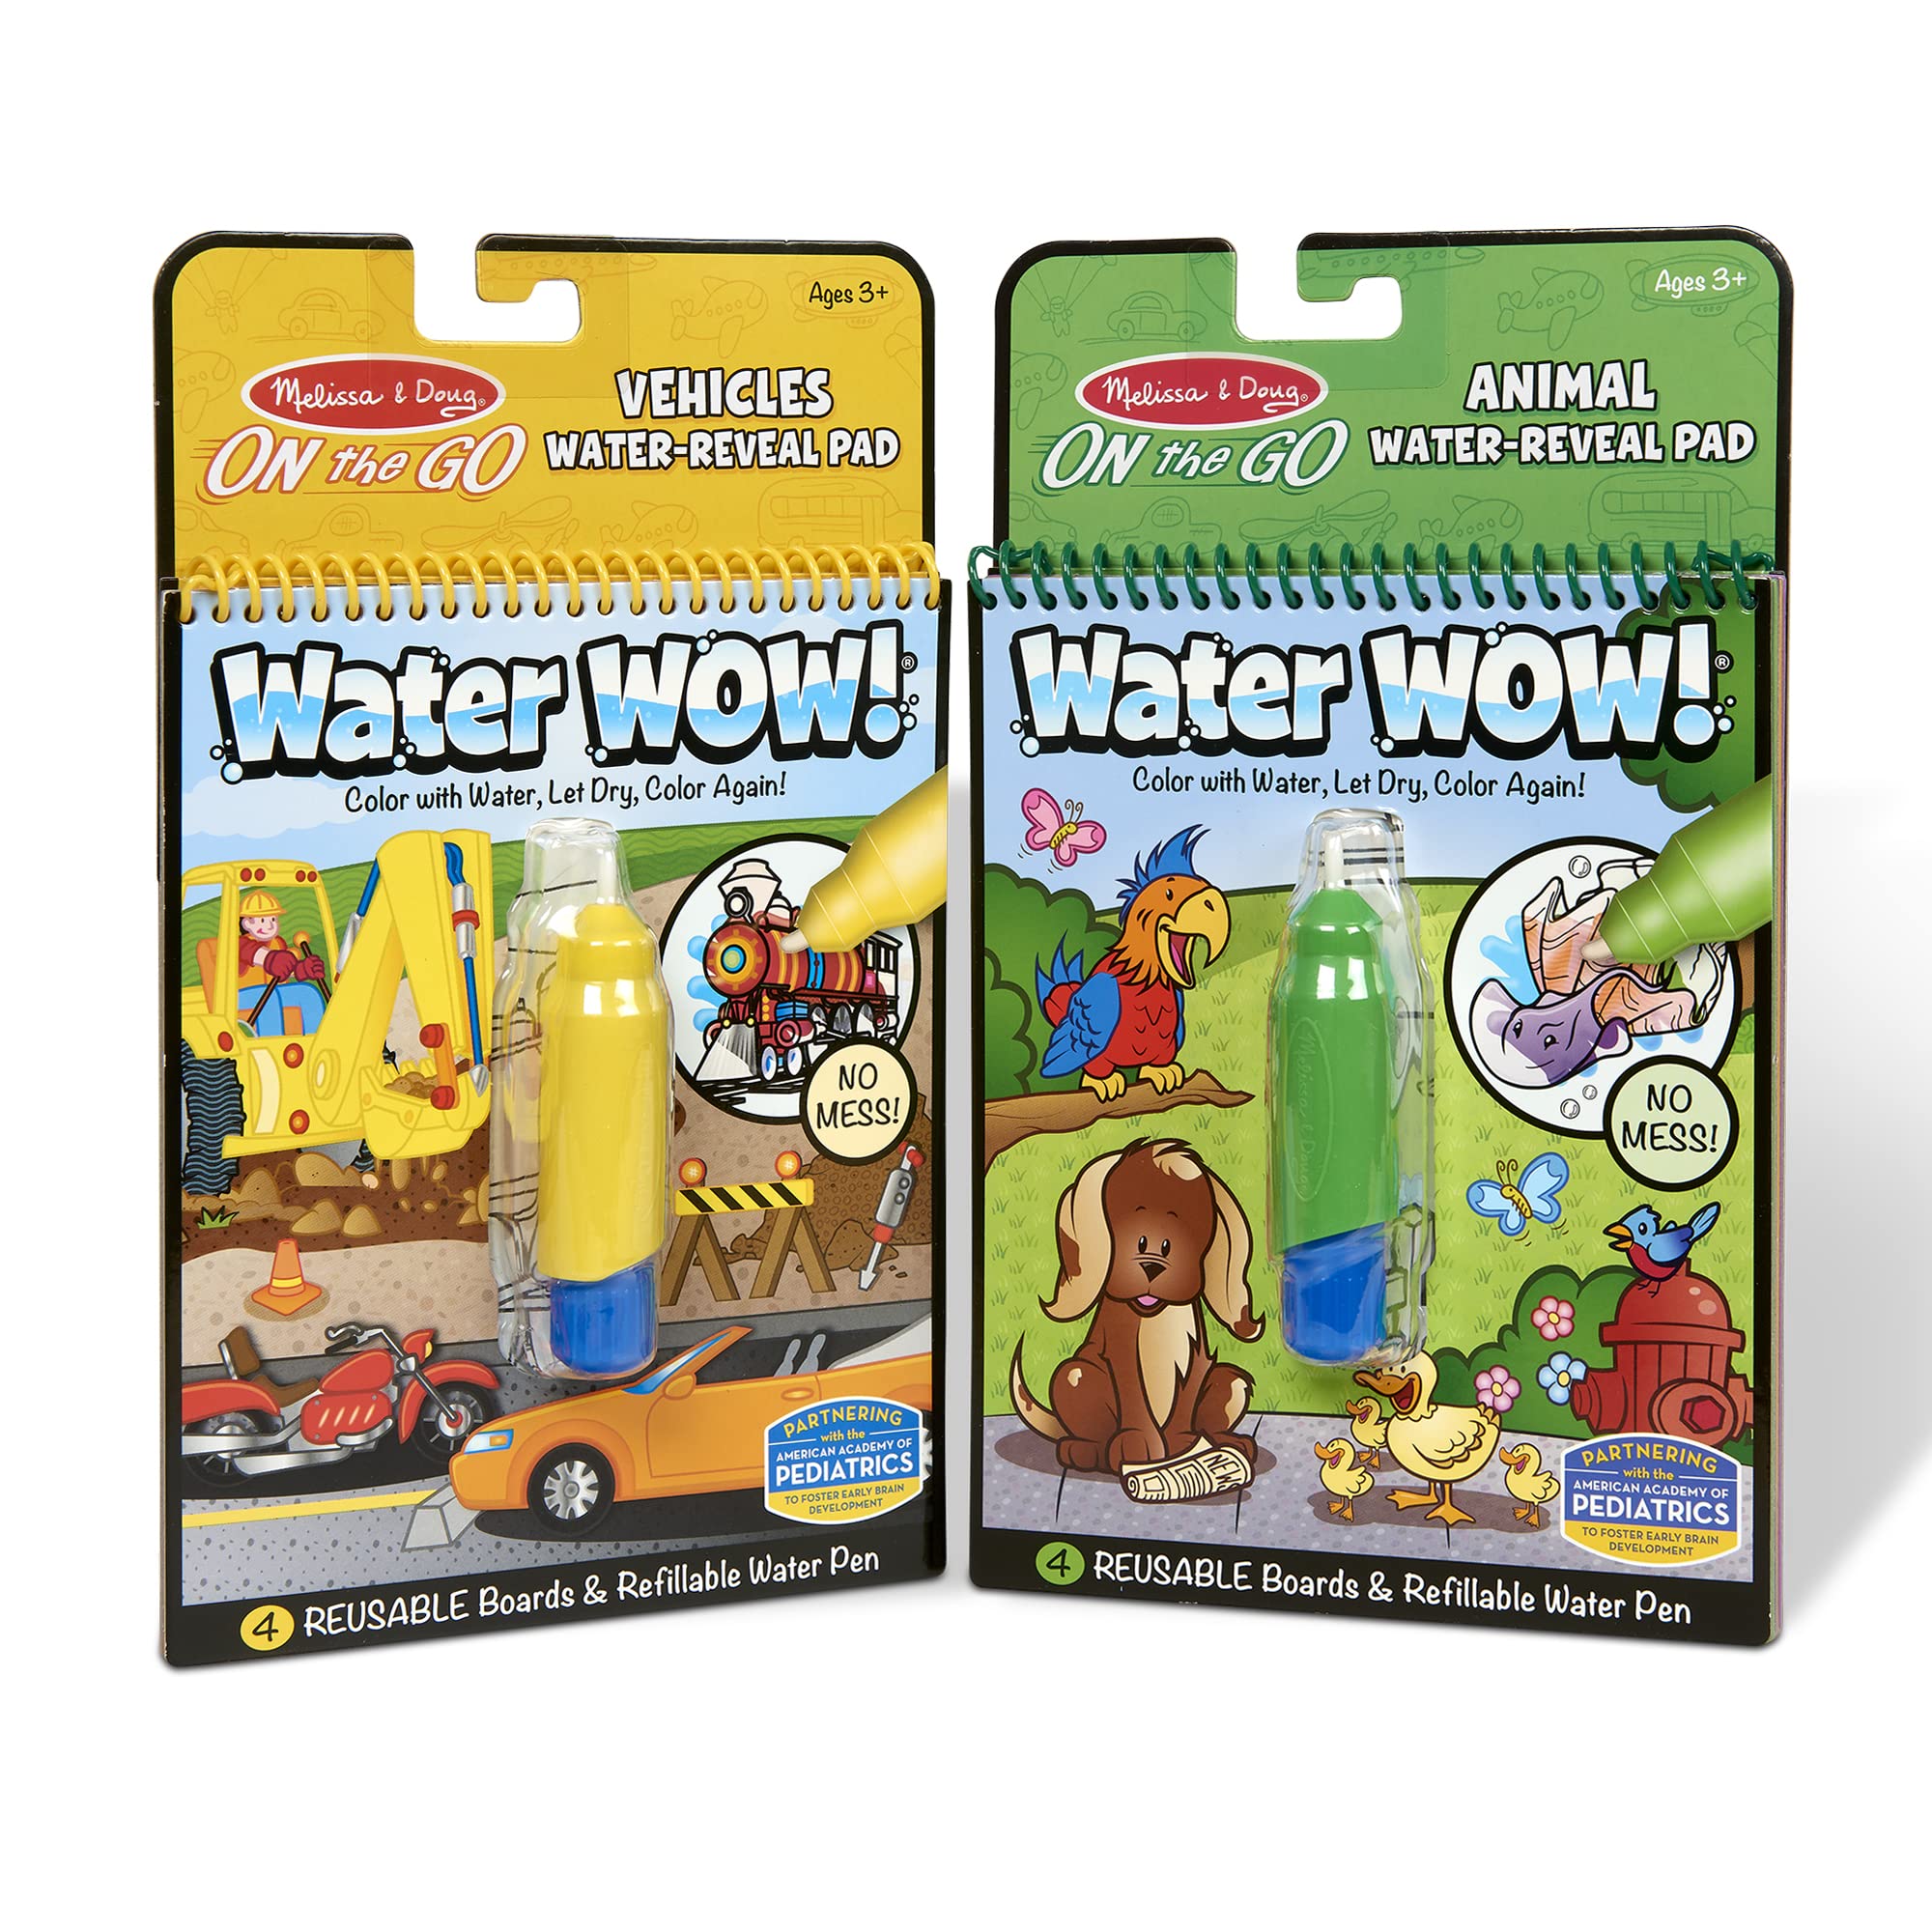 Melissa & Doug On the Go Water Wow! Reusable Water-Reveal Activity Pads, 2-pk, Vehicles, Animals - Party Favors, Stocking Stuffers, Travel Toys For Toddlers, Mess Free Coloring Books For Kids Ages 3+